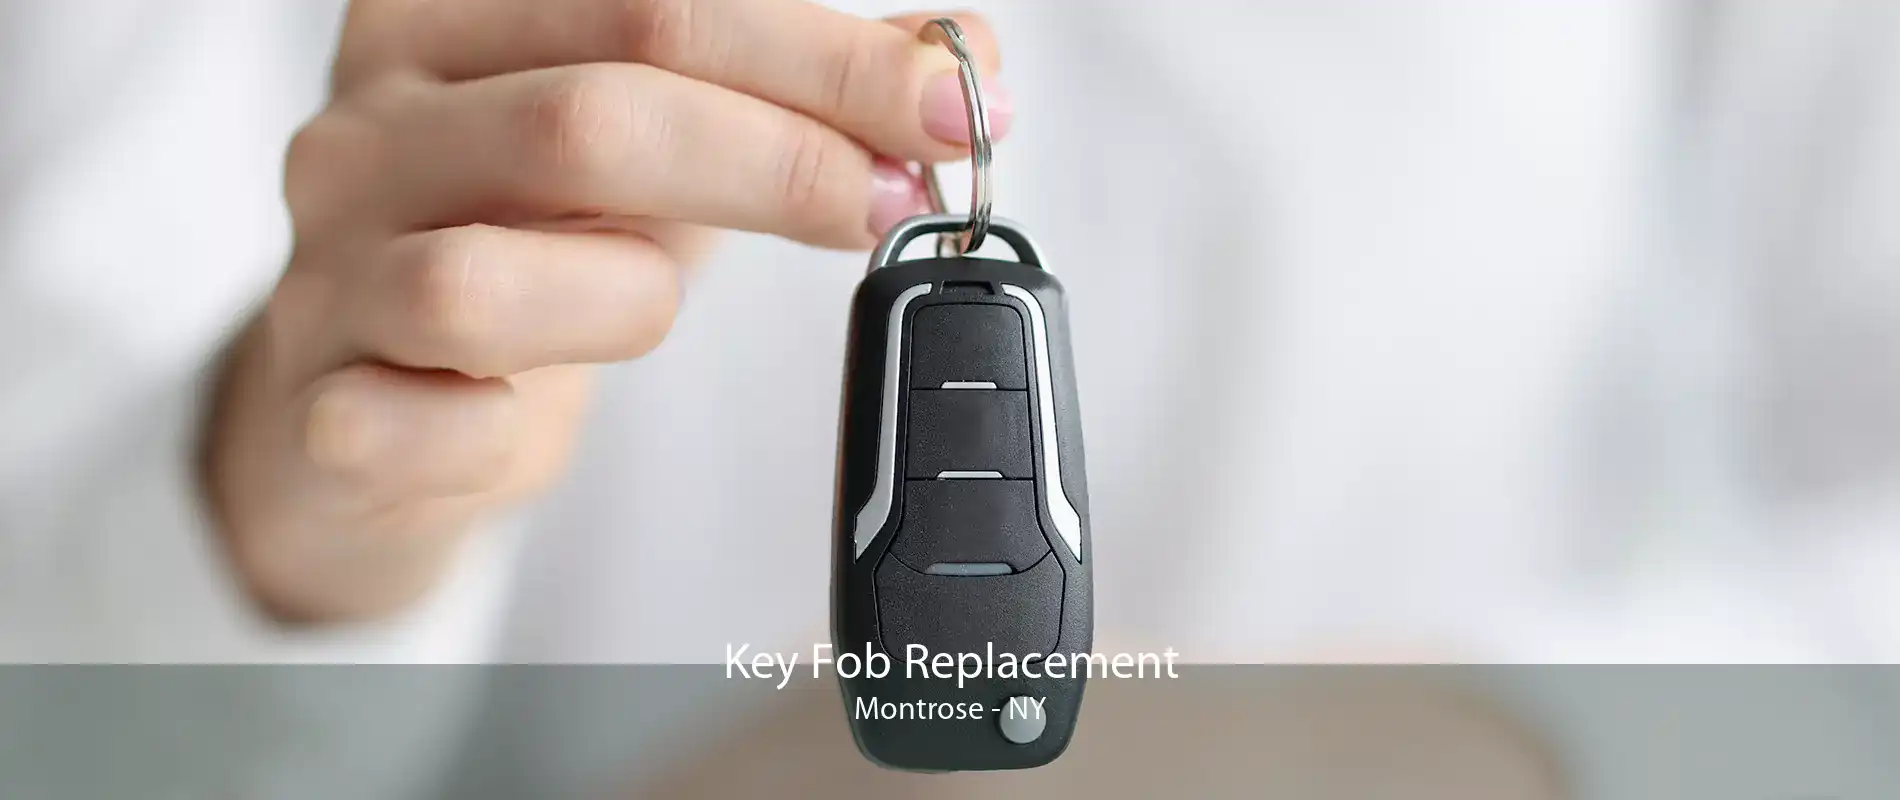 Key Fob Replacement Montrose - NY